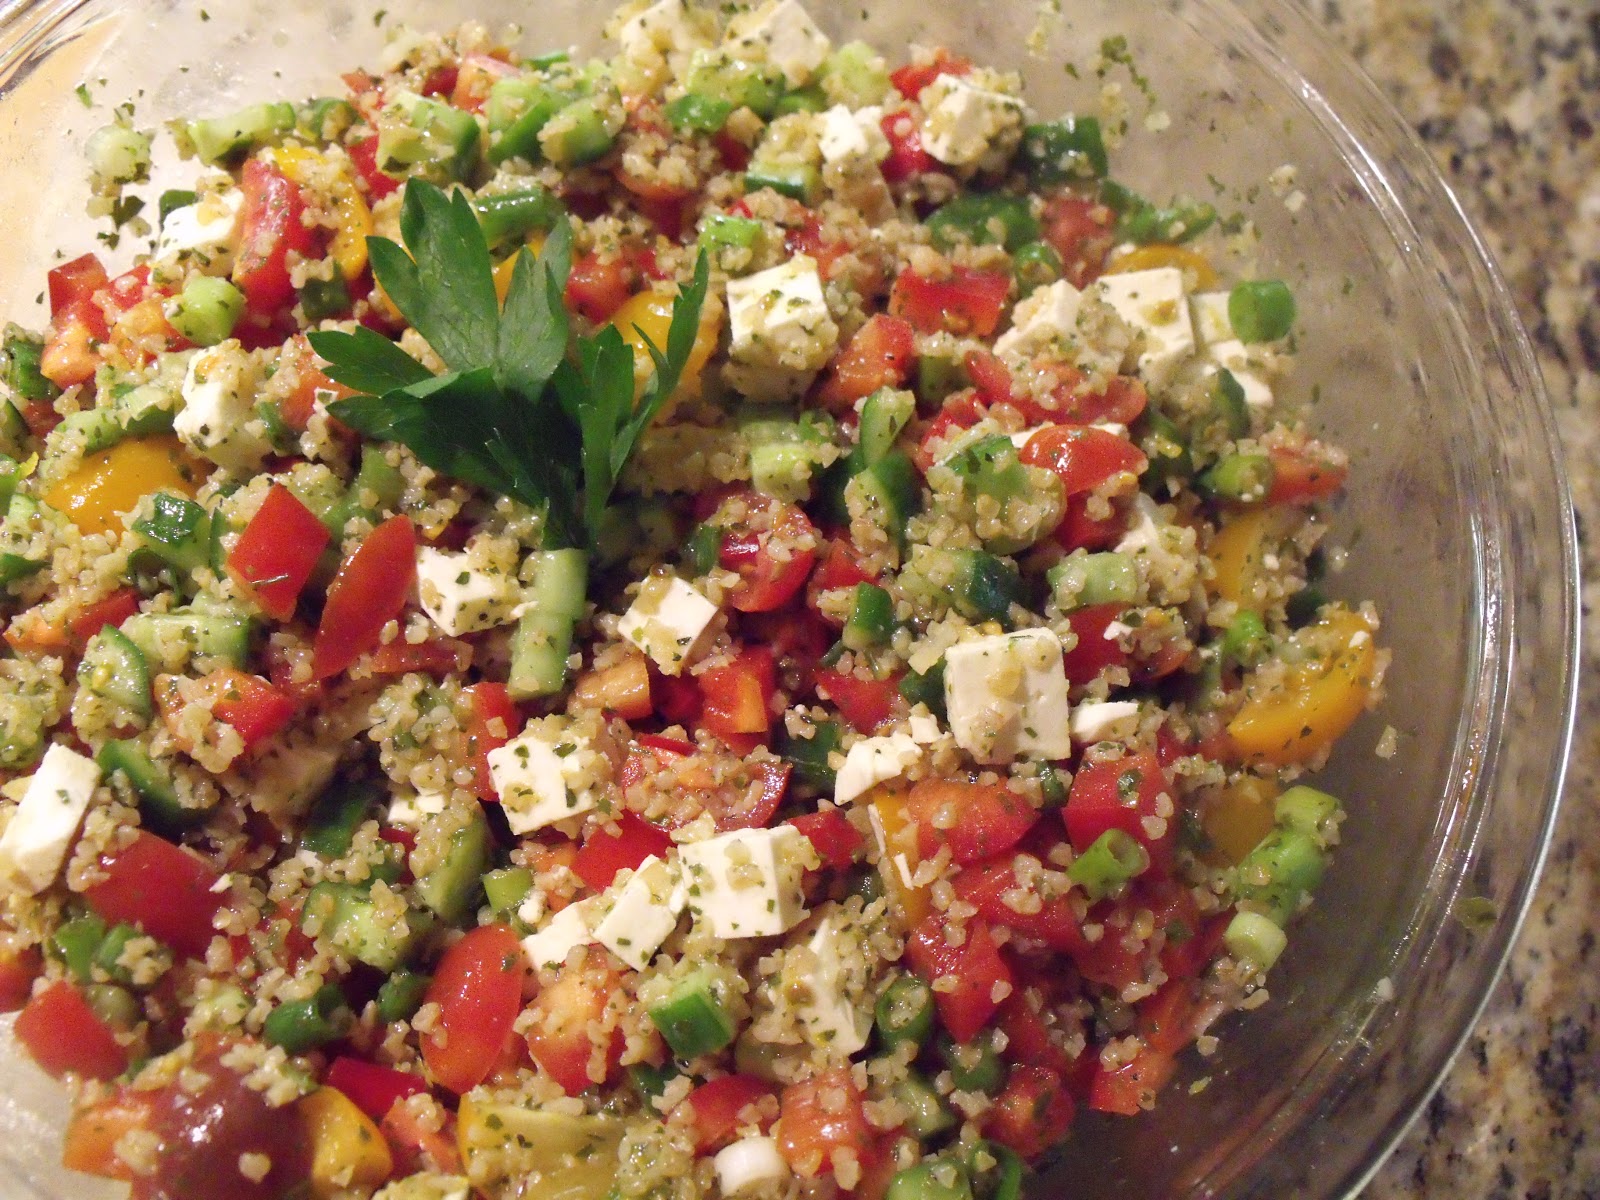 Simply Delicious: Tabbouleh Salad